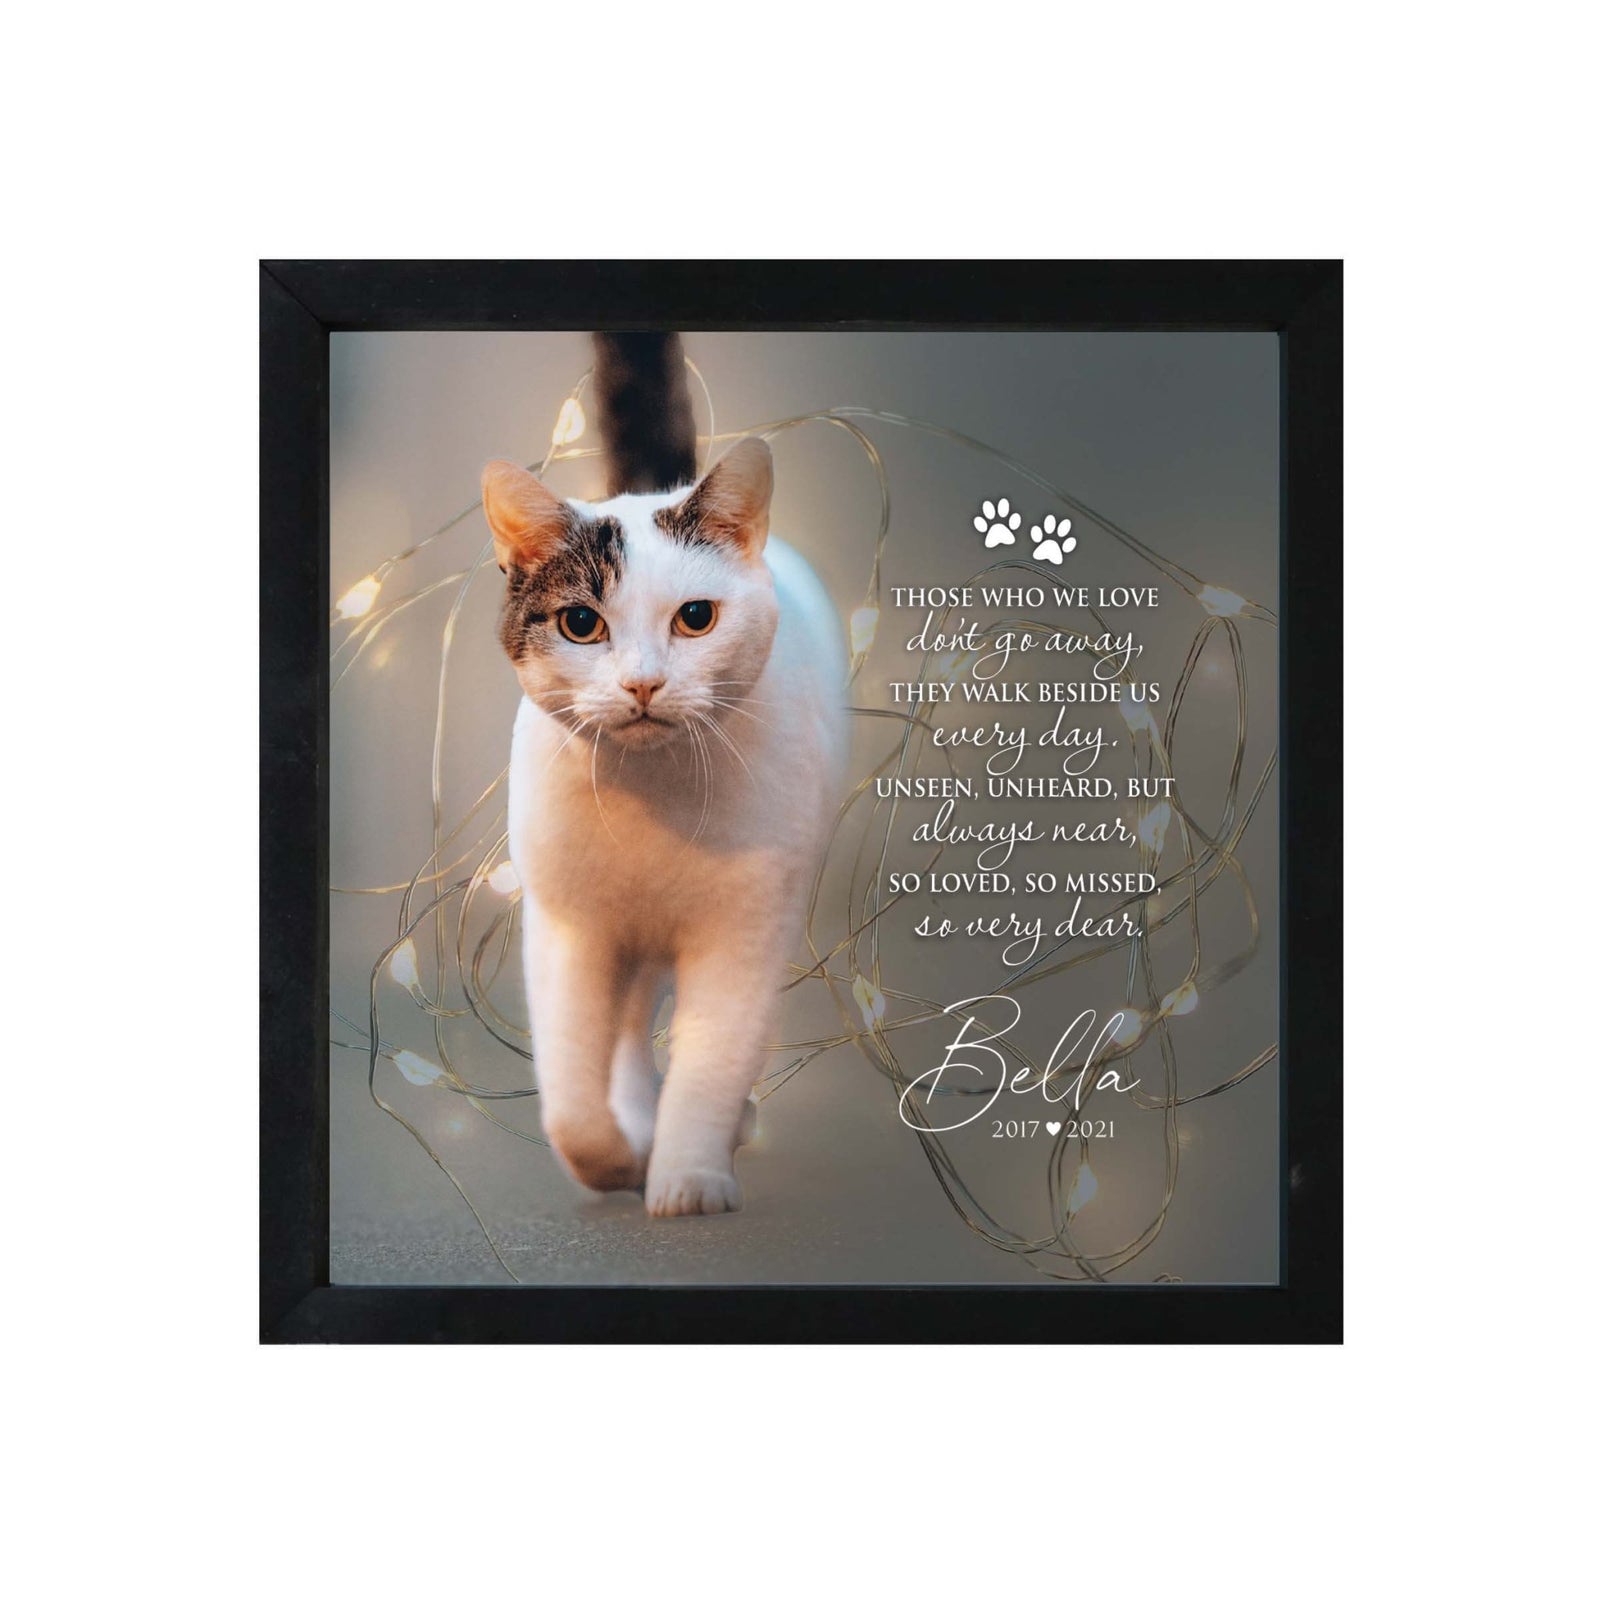 Custom Pet Memorial Framed Shadow Box Wall Décor for the Loss of Beloved Pet - Those Who We Love - LifeSong Milestones